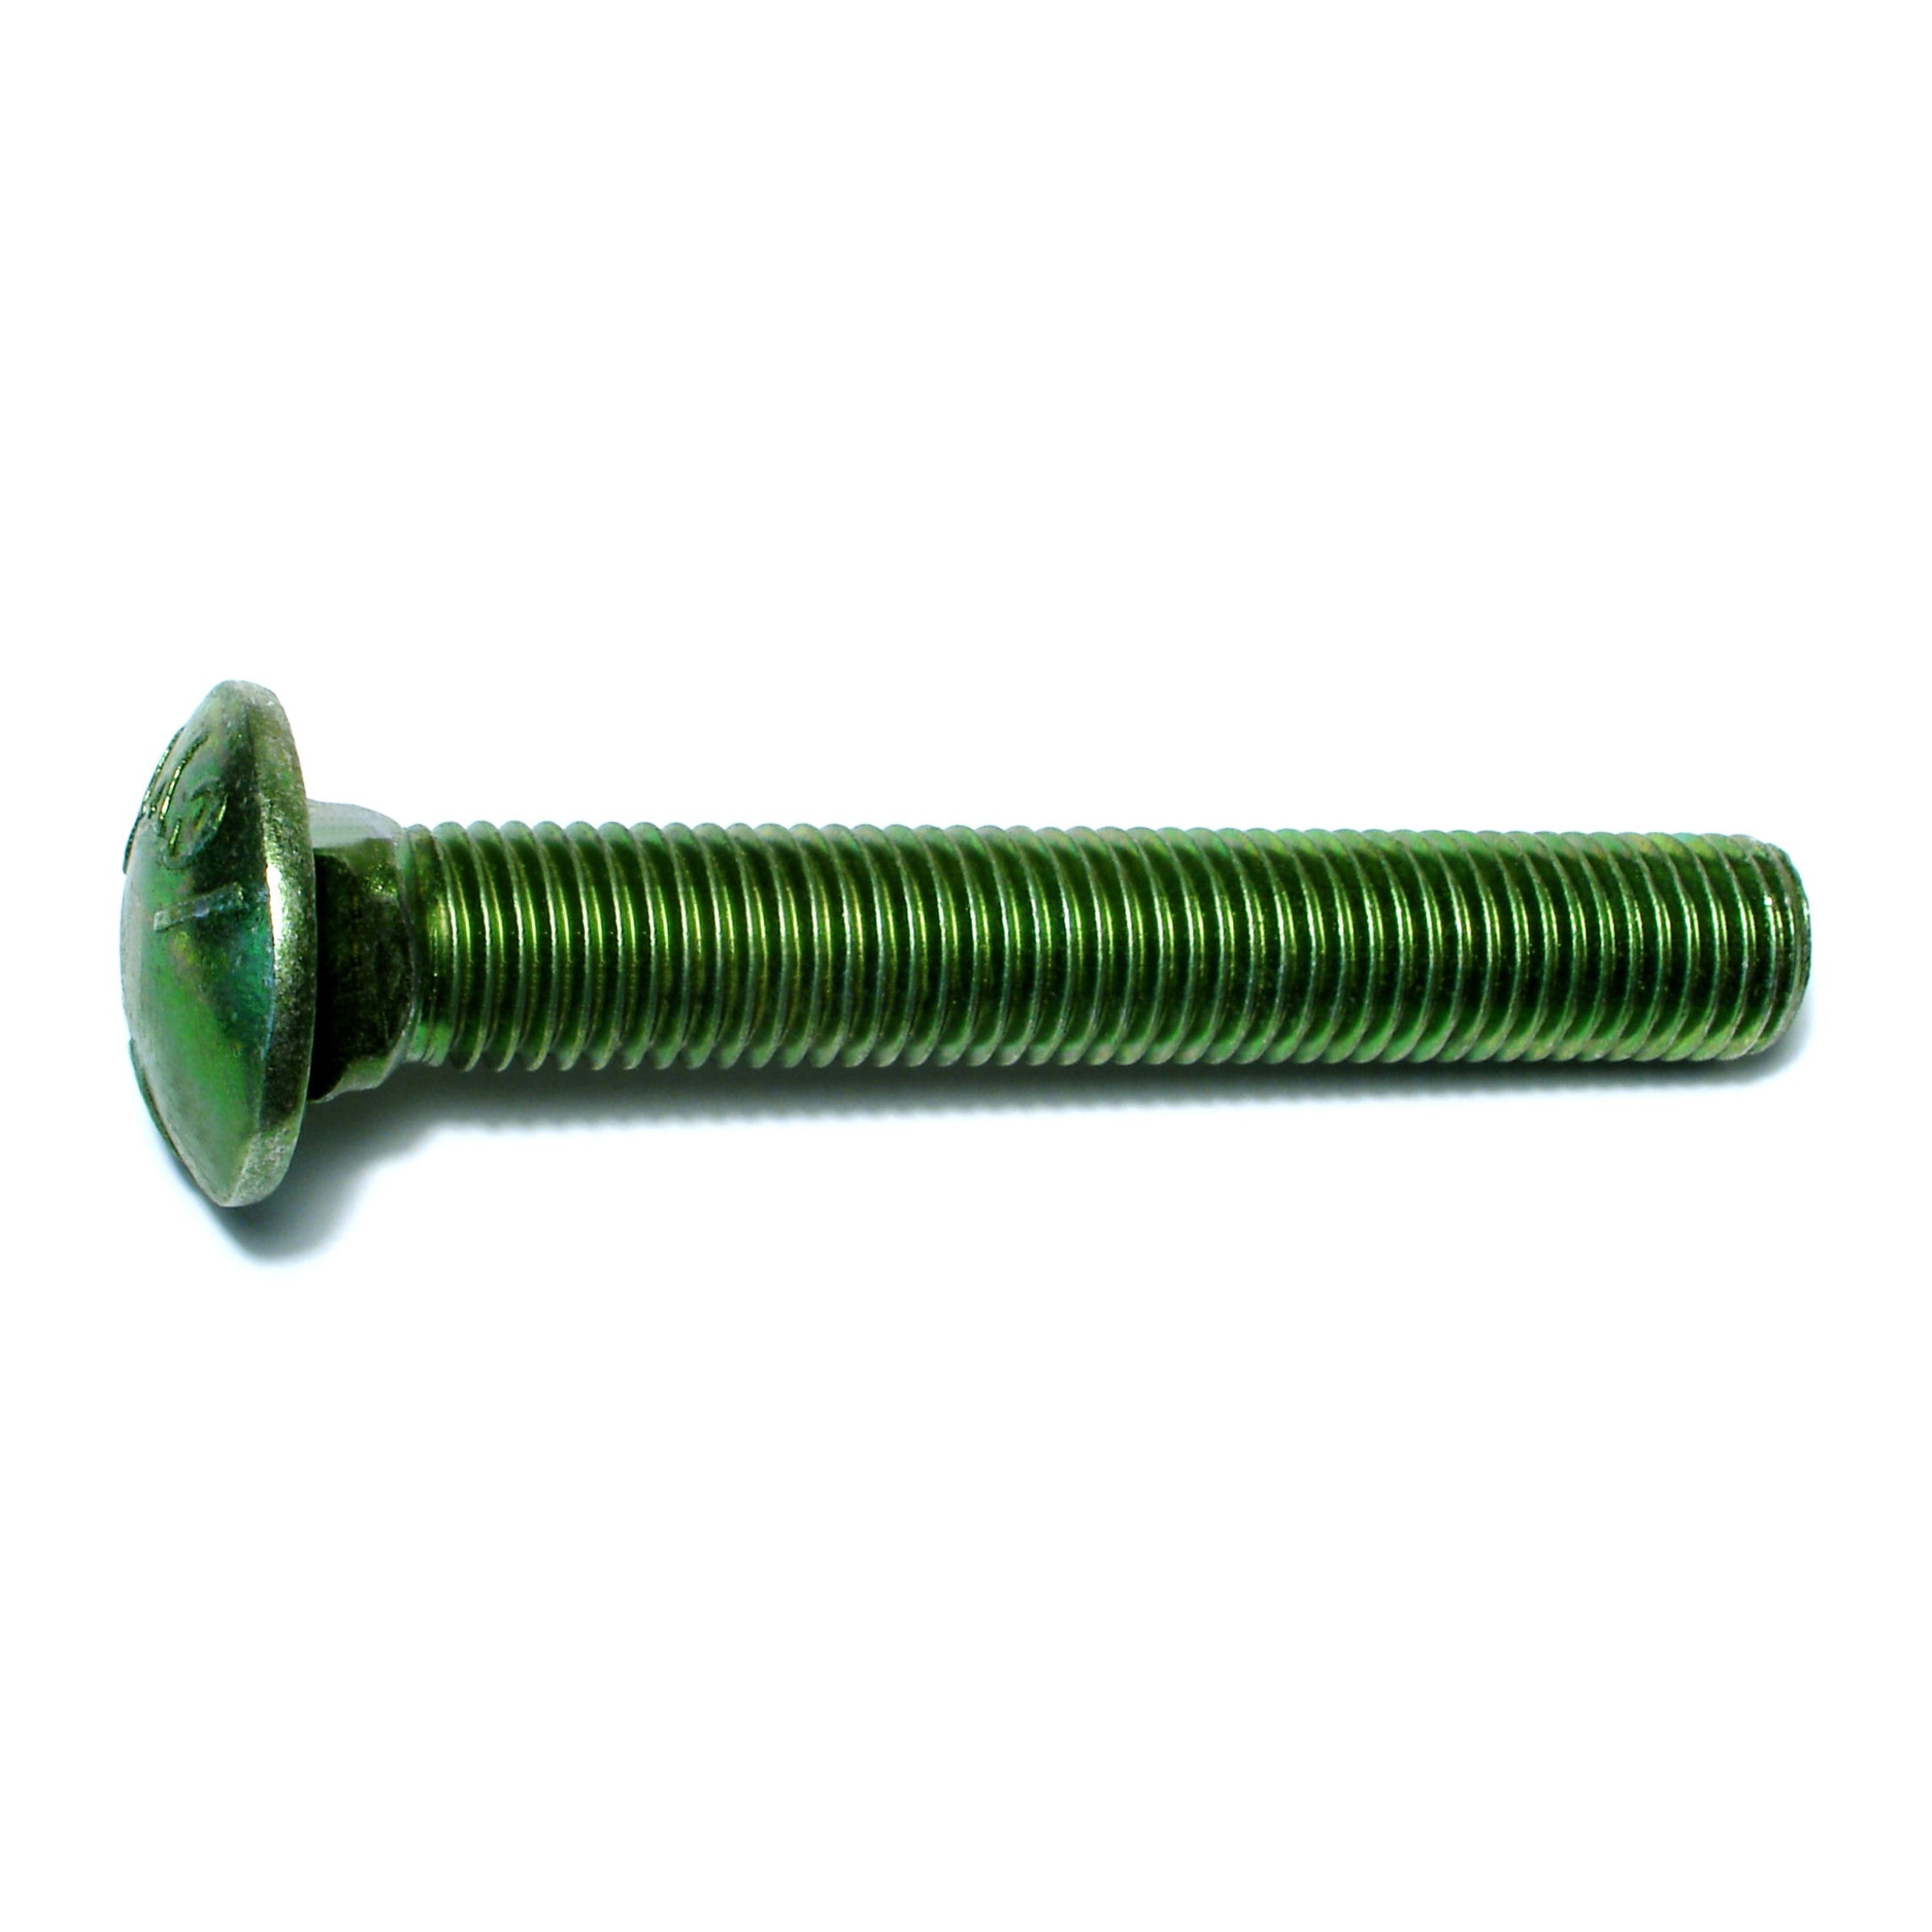 3/4"-10 x 5" Green Rinsed Zinc Plated Grade 5 Steel Coarse Thread Carriage Bolts